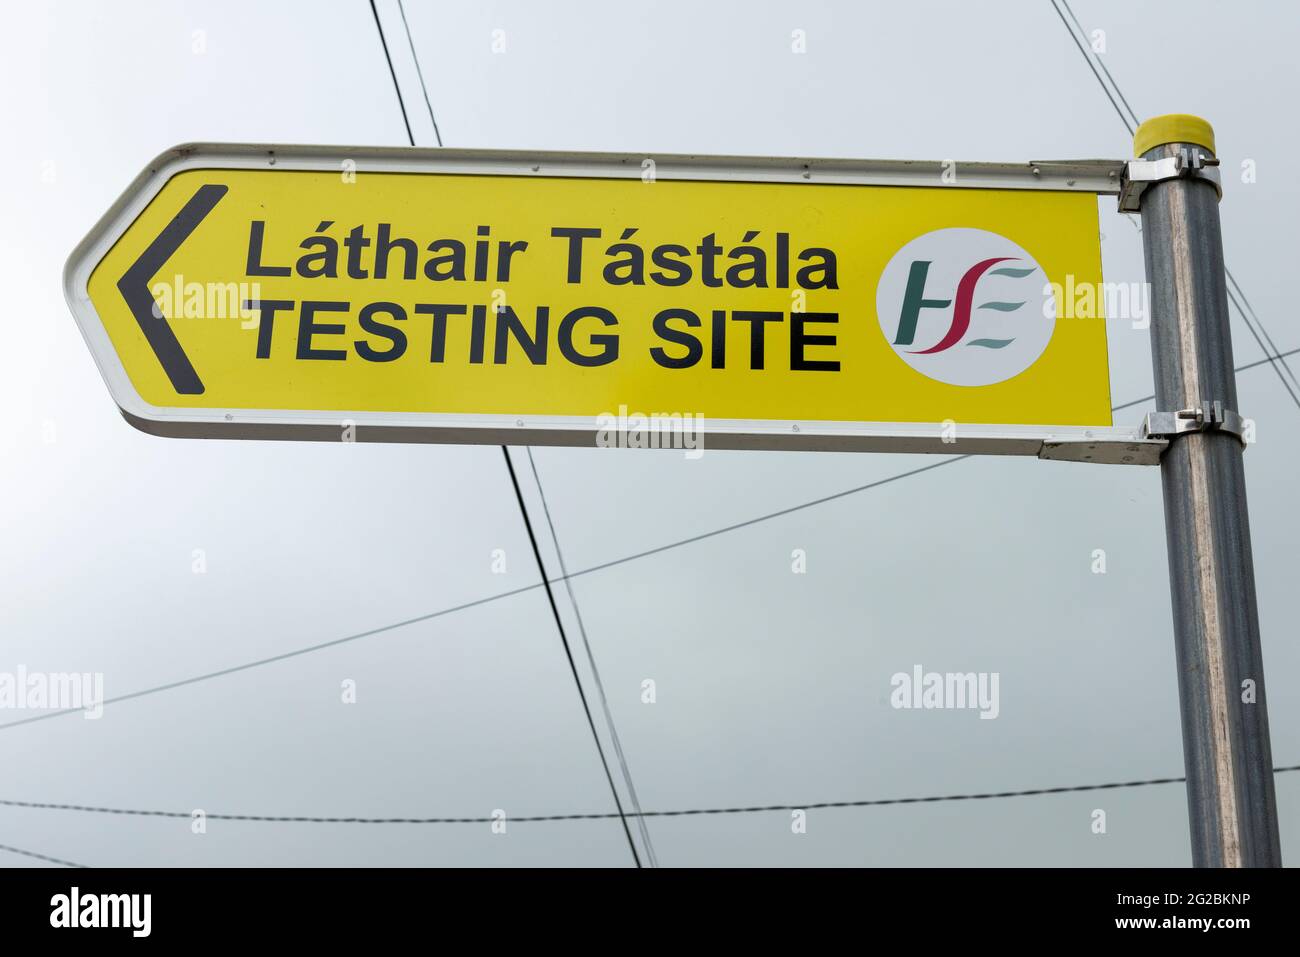 HSE testing site sign at the Ballymullen Barracks in Tralee, County Kerry, Ireland Stock Photo